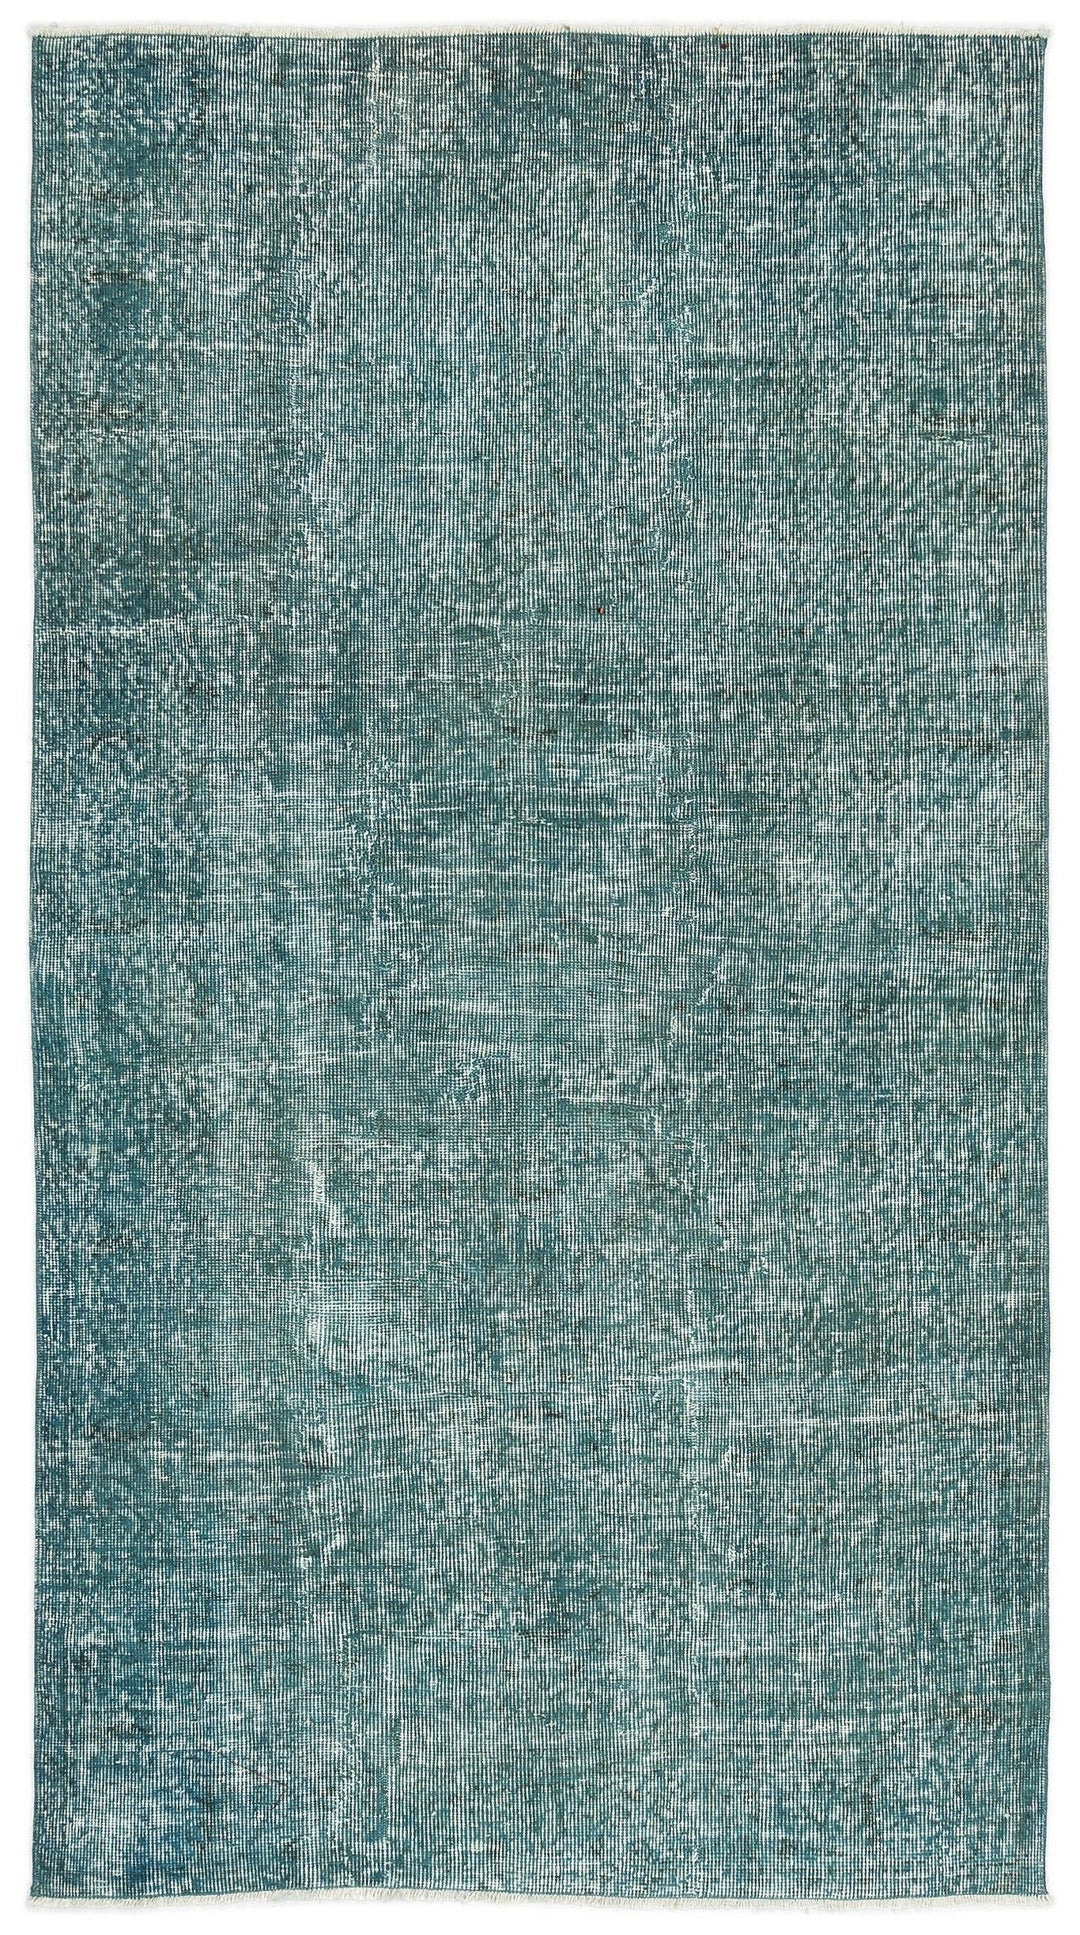 Athens Turquoise Tumbled Wool Hand Woven Carpet 116 x 216